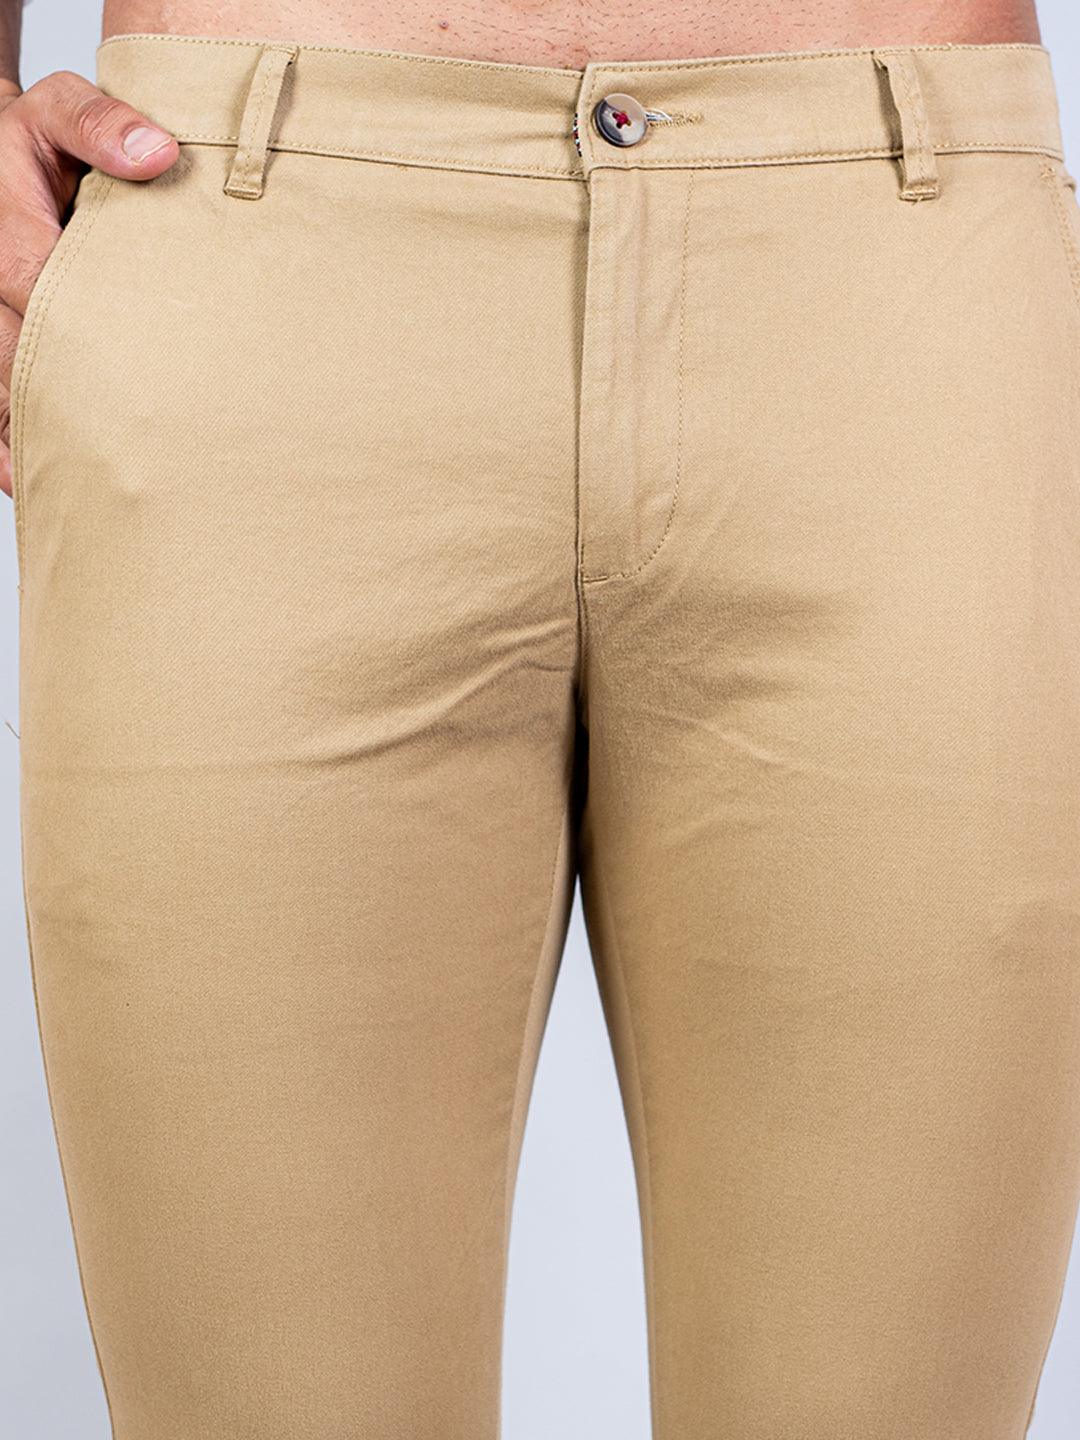 Buy Khaki Formal Trousers Online in India at Best Price - Westside